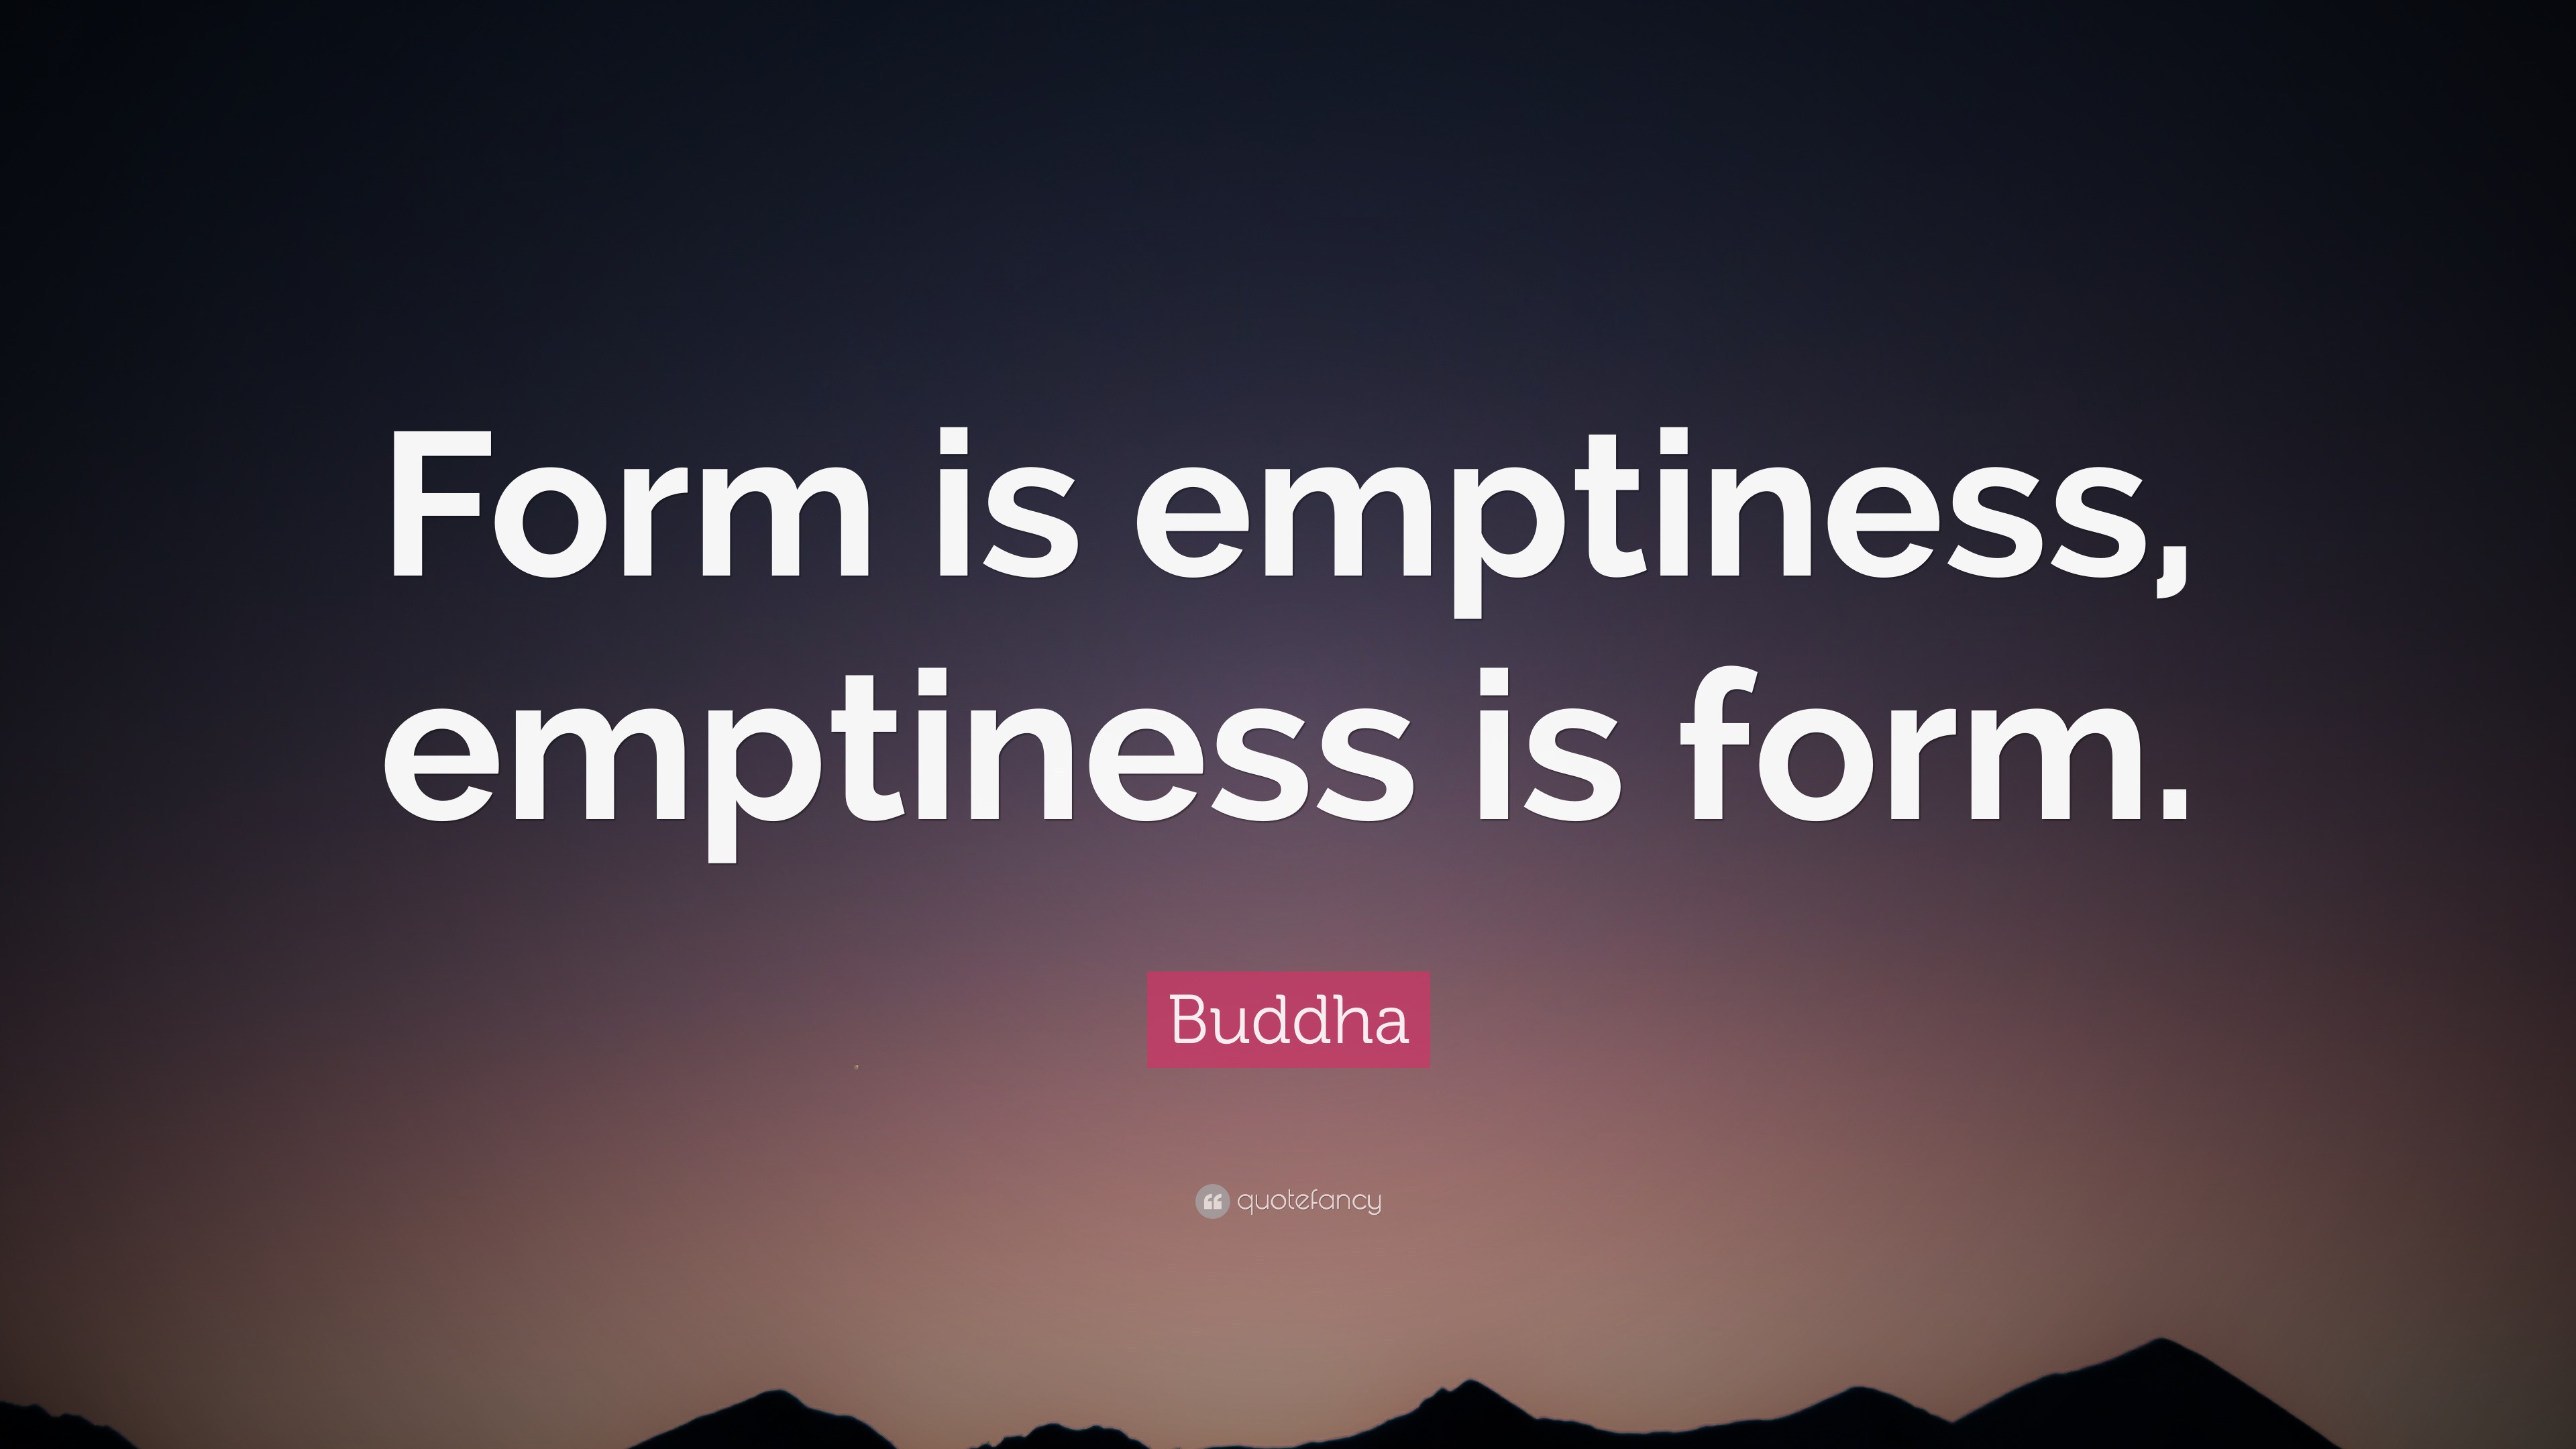 the form of emptiness